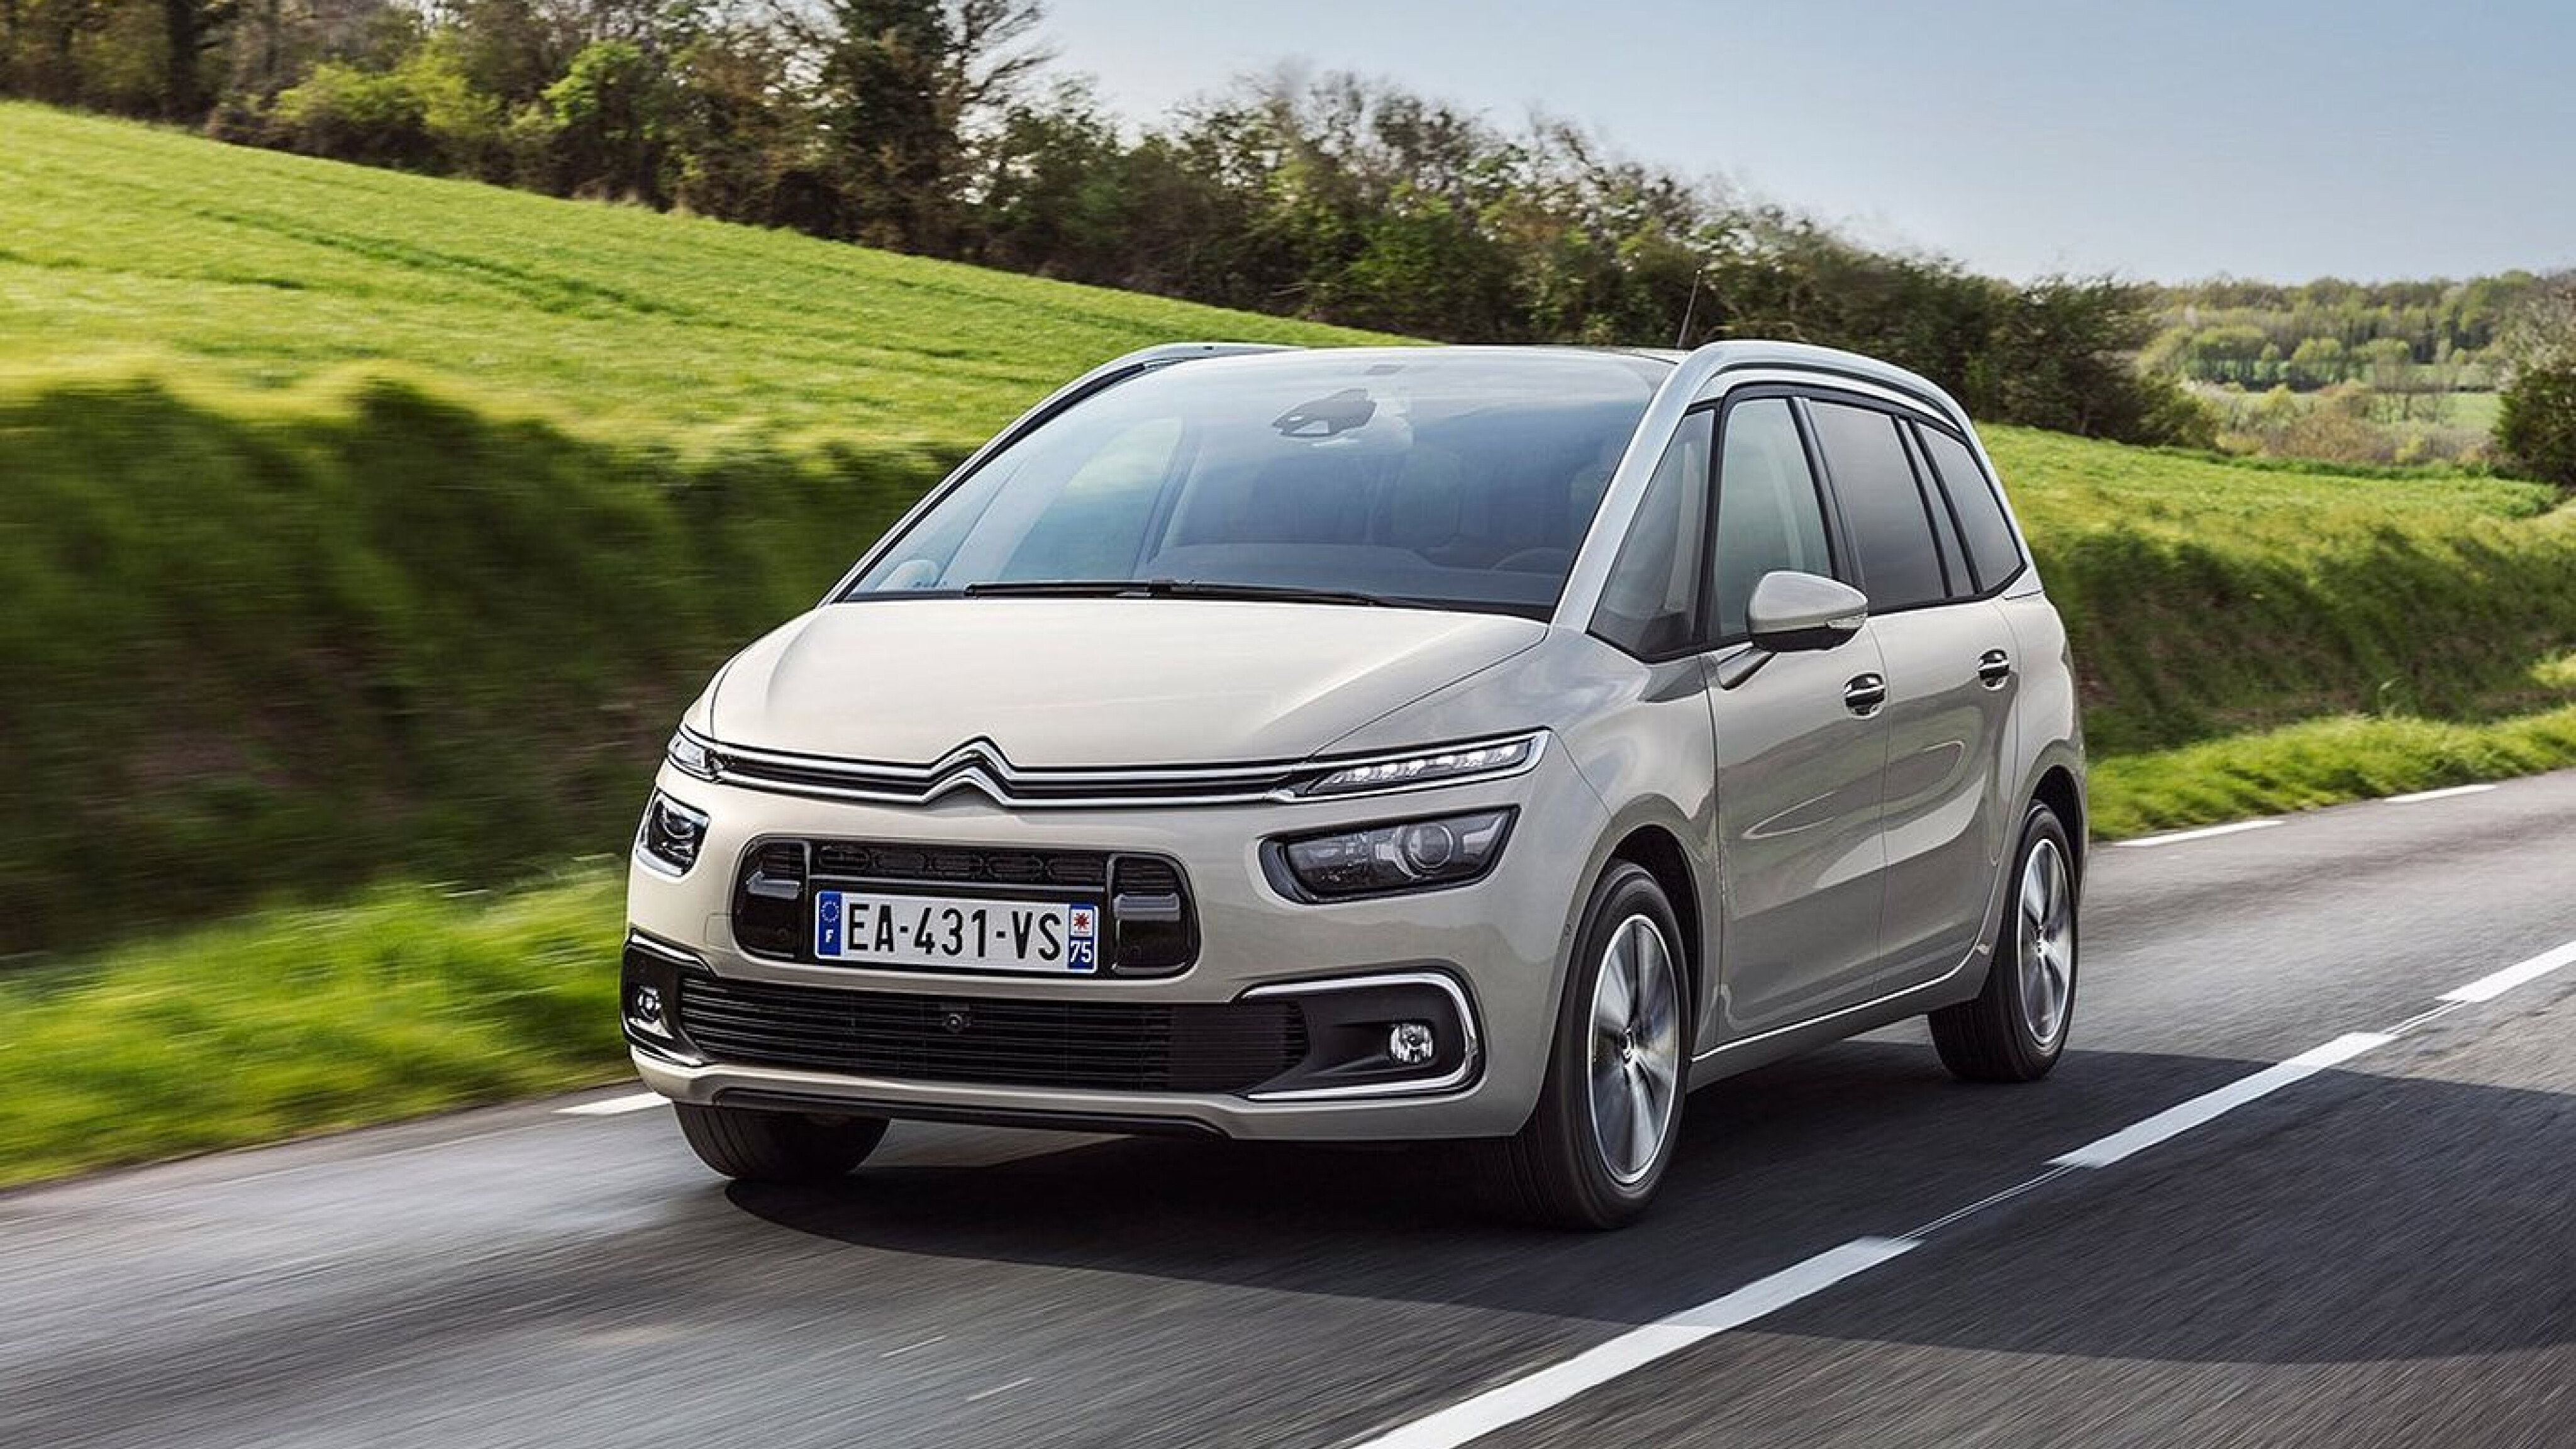 NEW CITROËN GRAND C4 PICASSO PRICED FROM €24,250, Citroën